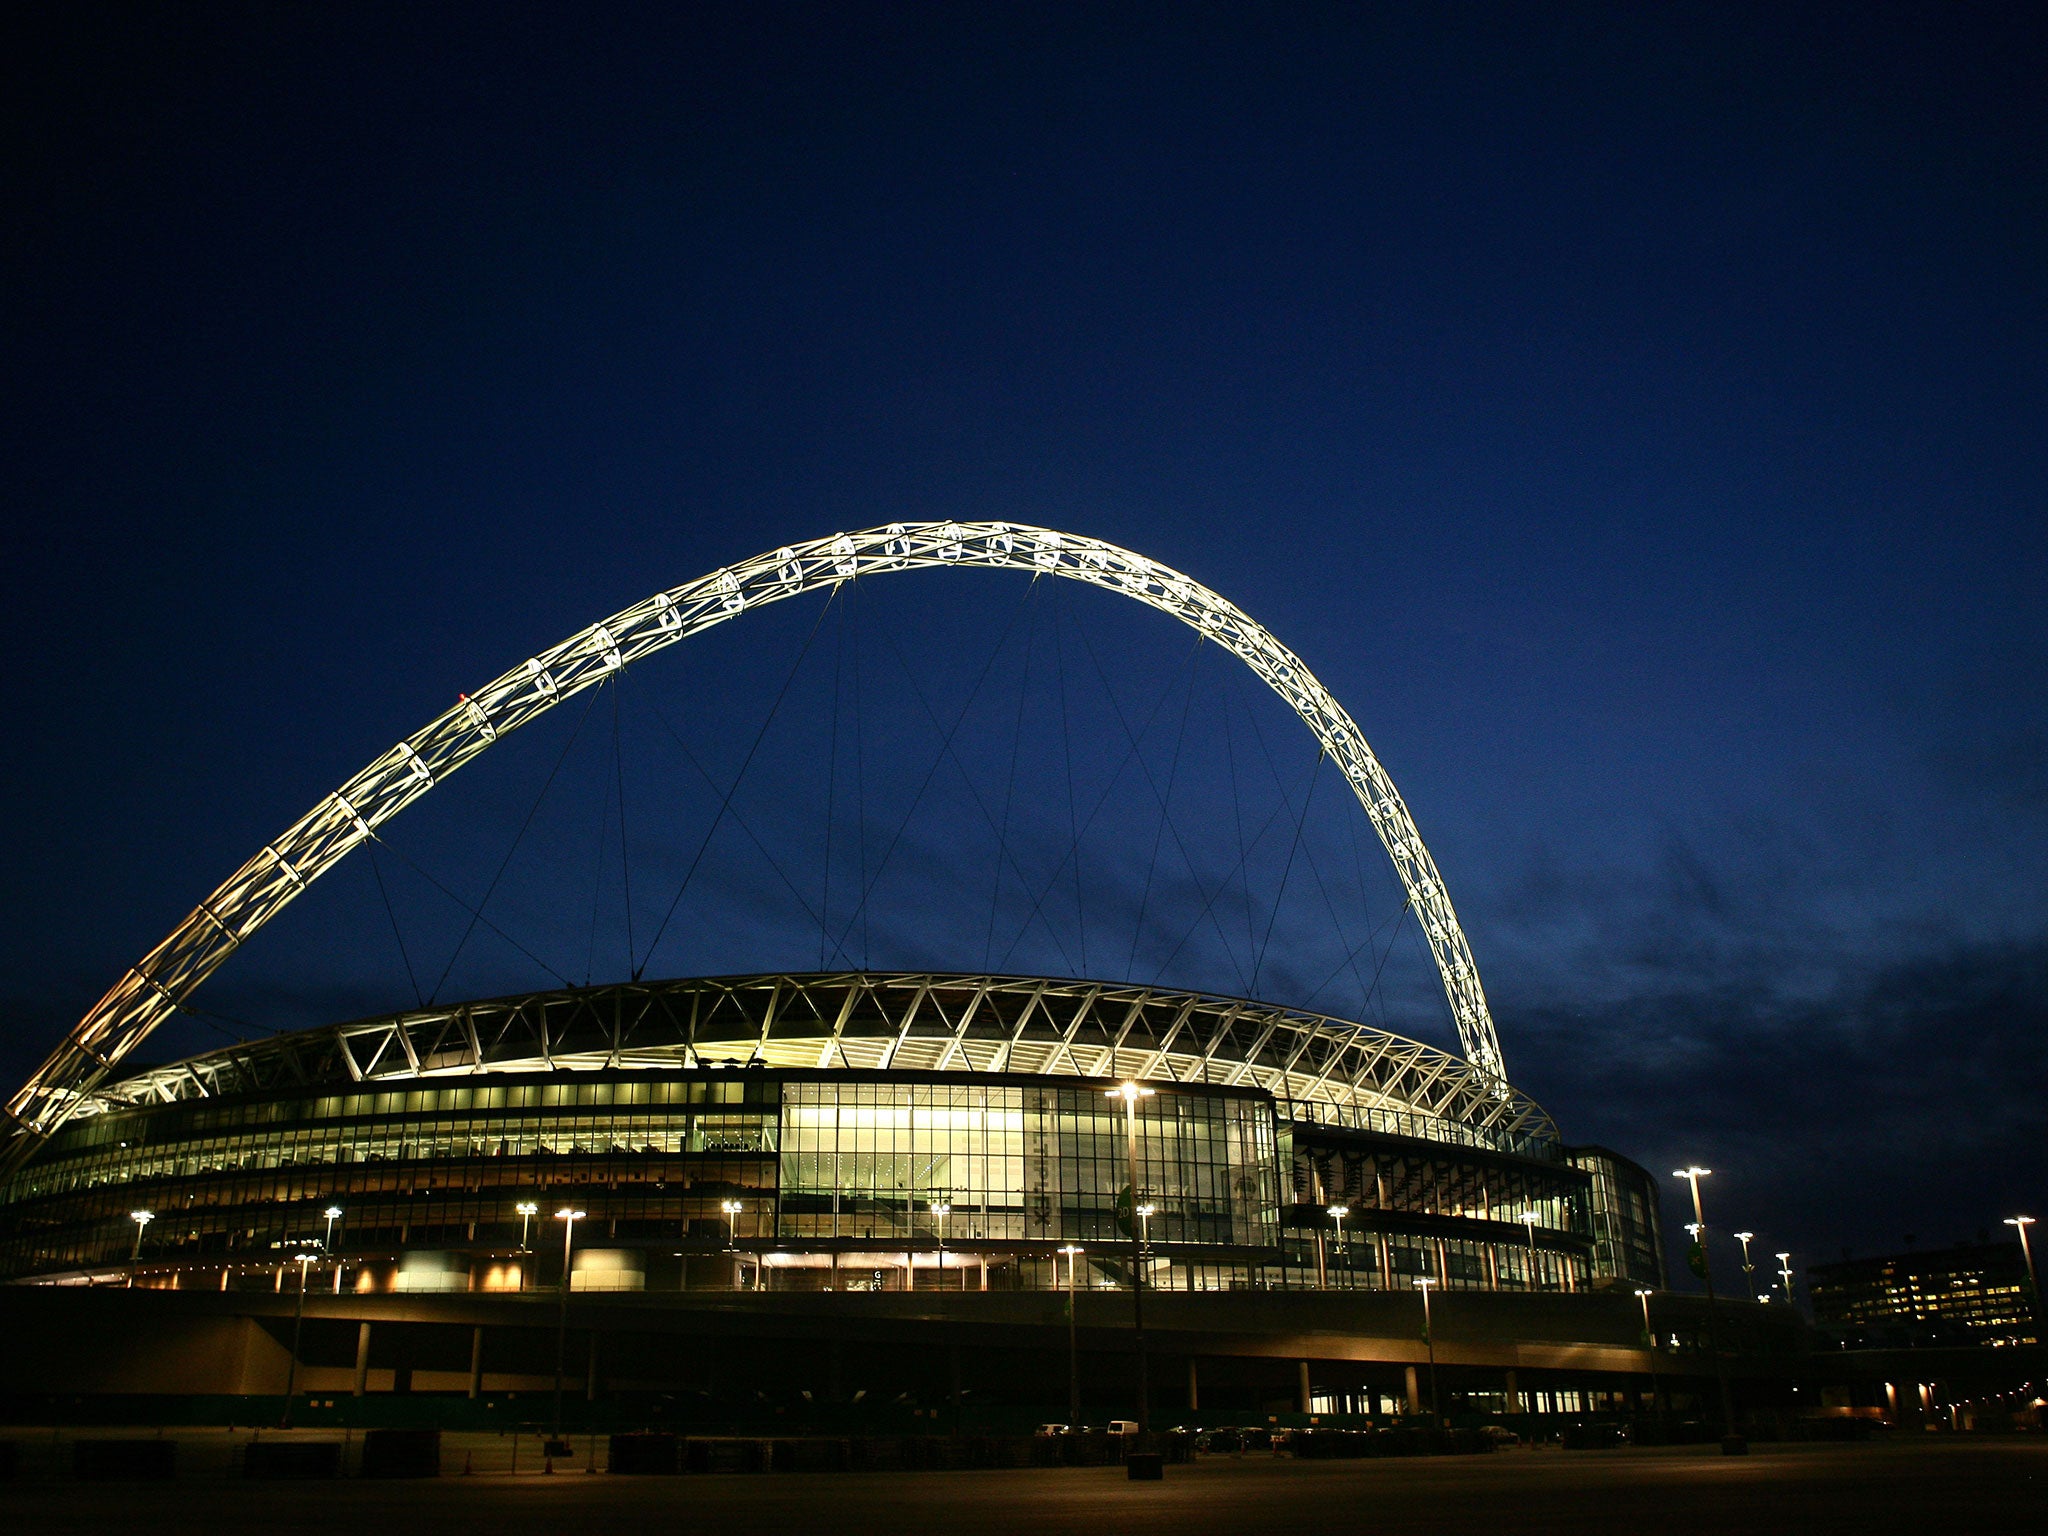 Wembley will host the final of Euro 2020